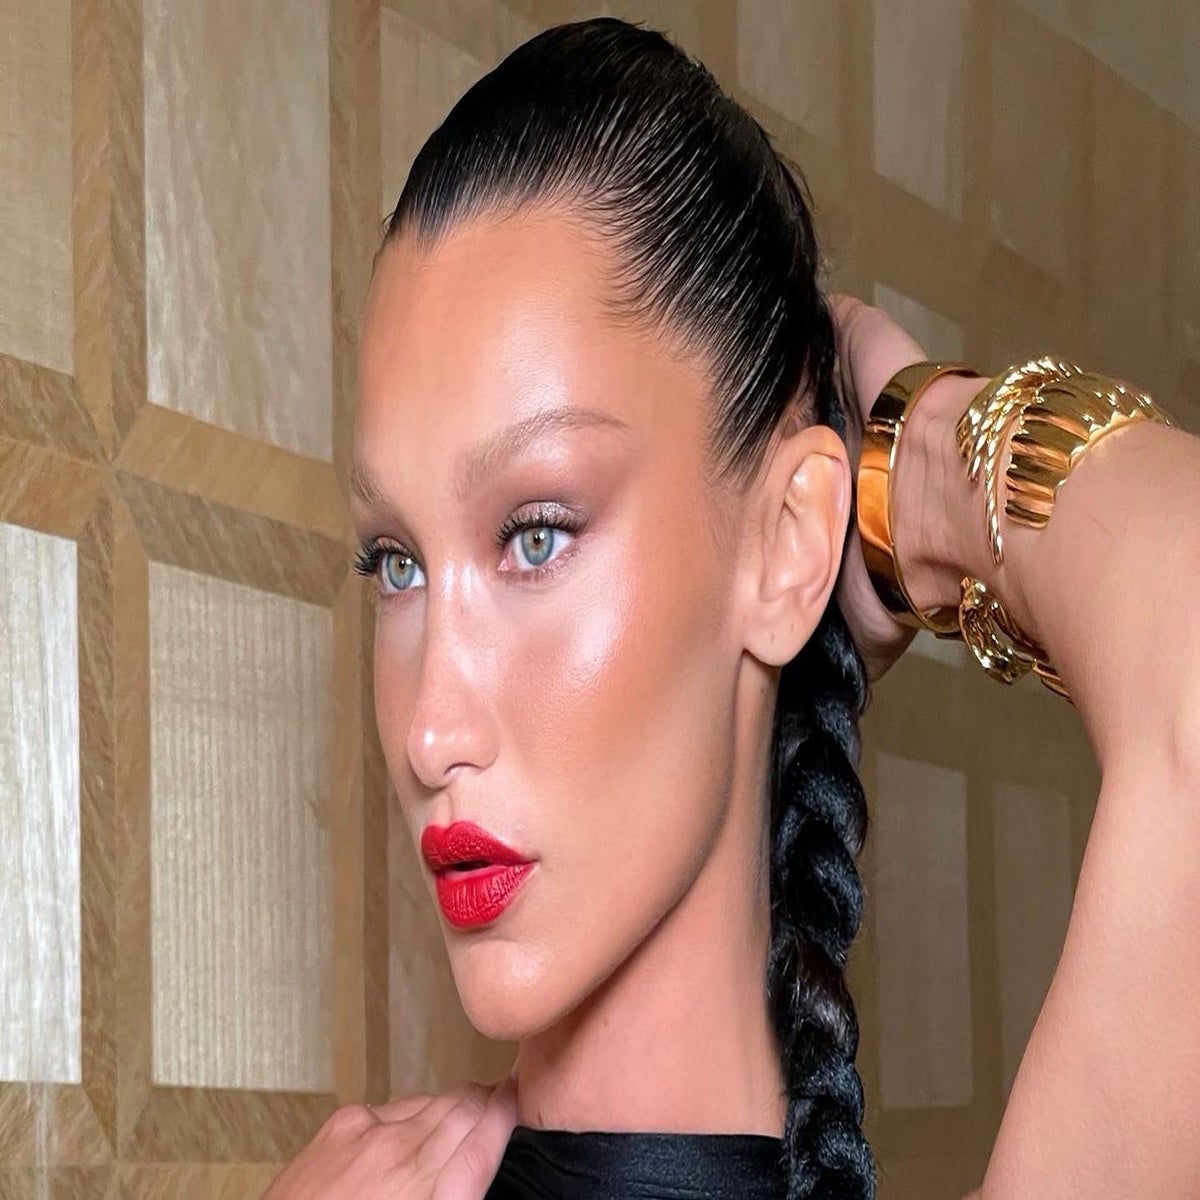 Bella Hadid Is The New Face Of Charlotte Tilbury